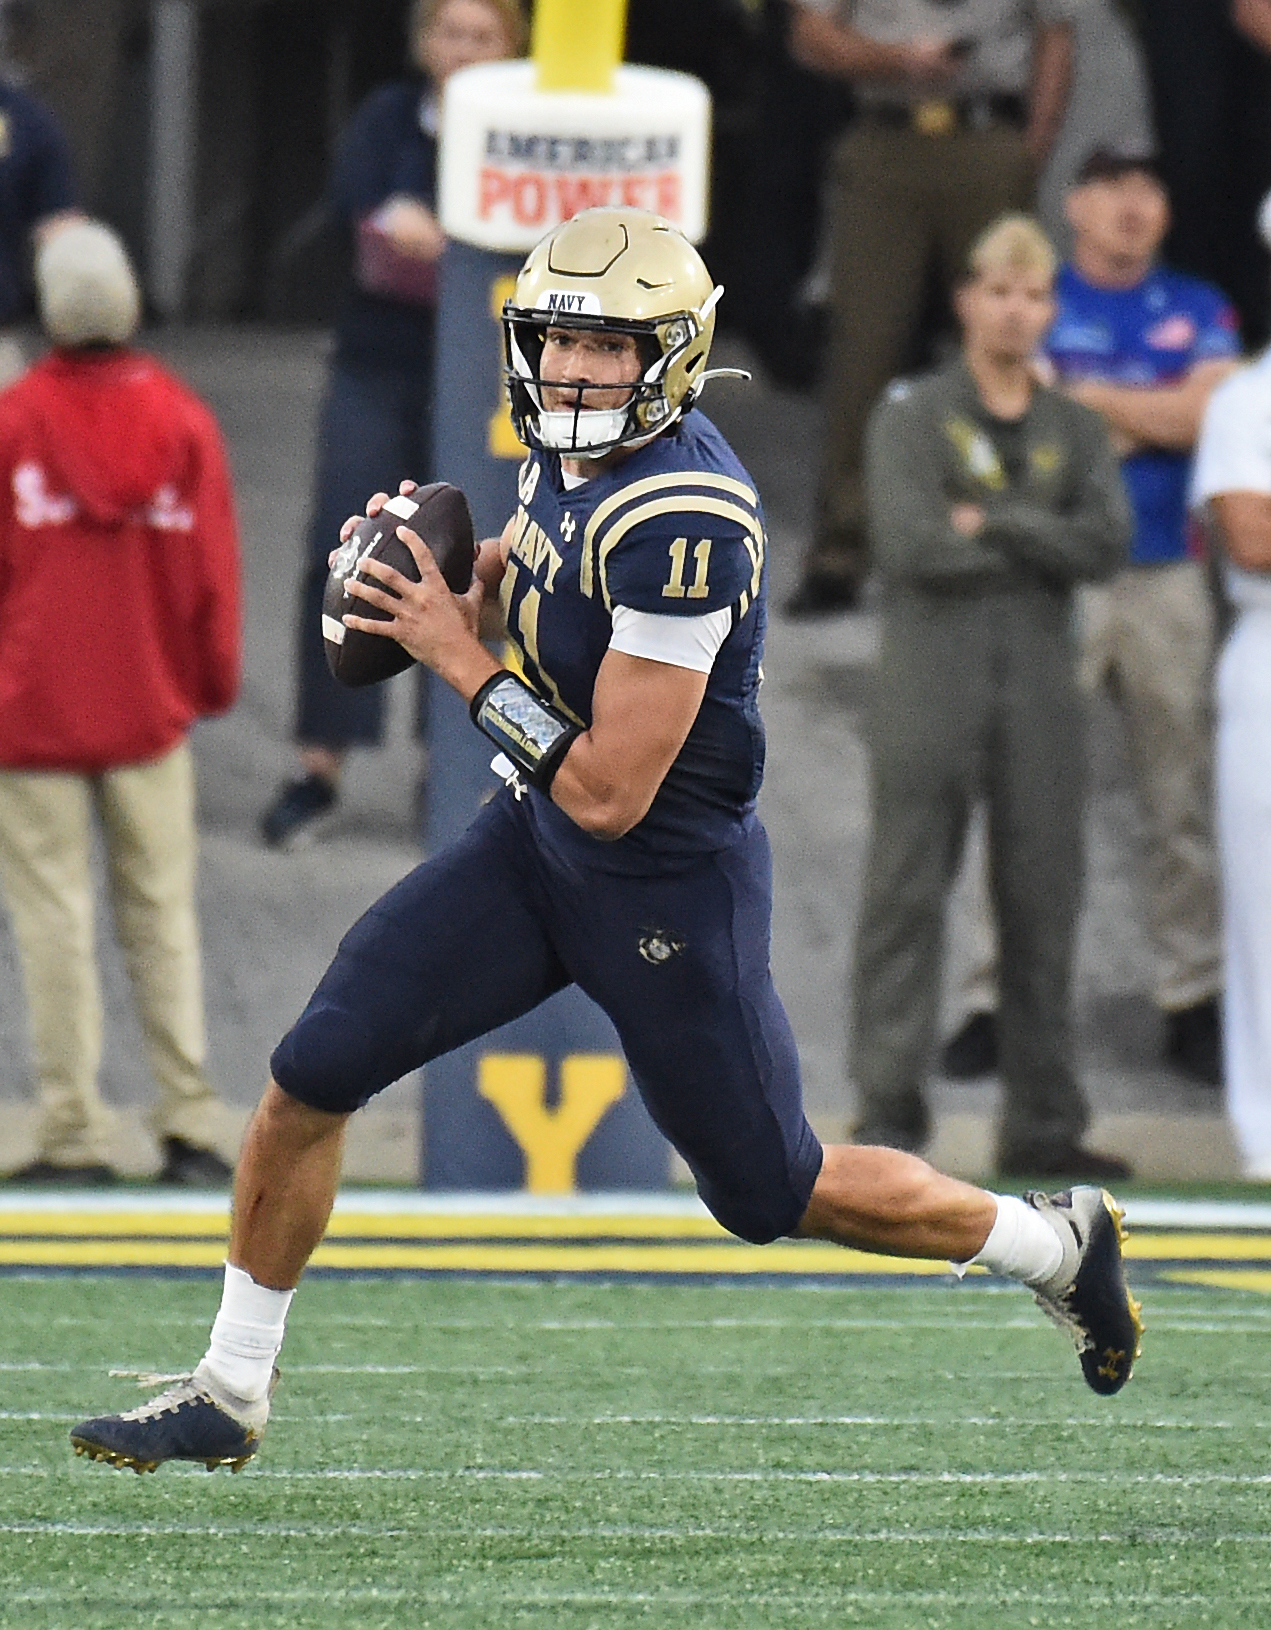 Navy quarterback Blake Horvath scrambles in the third quarter. The Navy Midshipmen play the visiting University of South Florida Bulls in NCAA football Saturday, September 30, 2023 at Navy-Marine Corps Memorial Stadium in Annapolis.